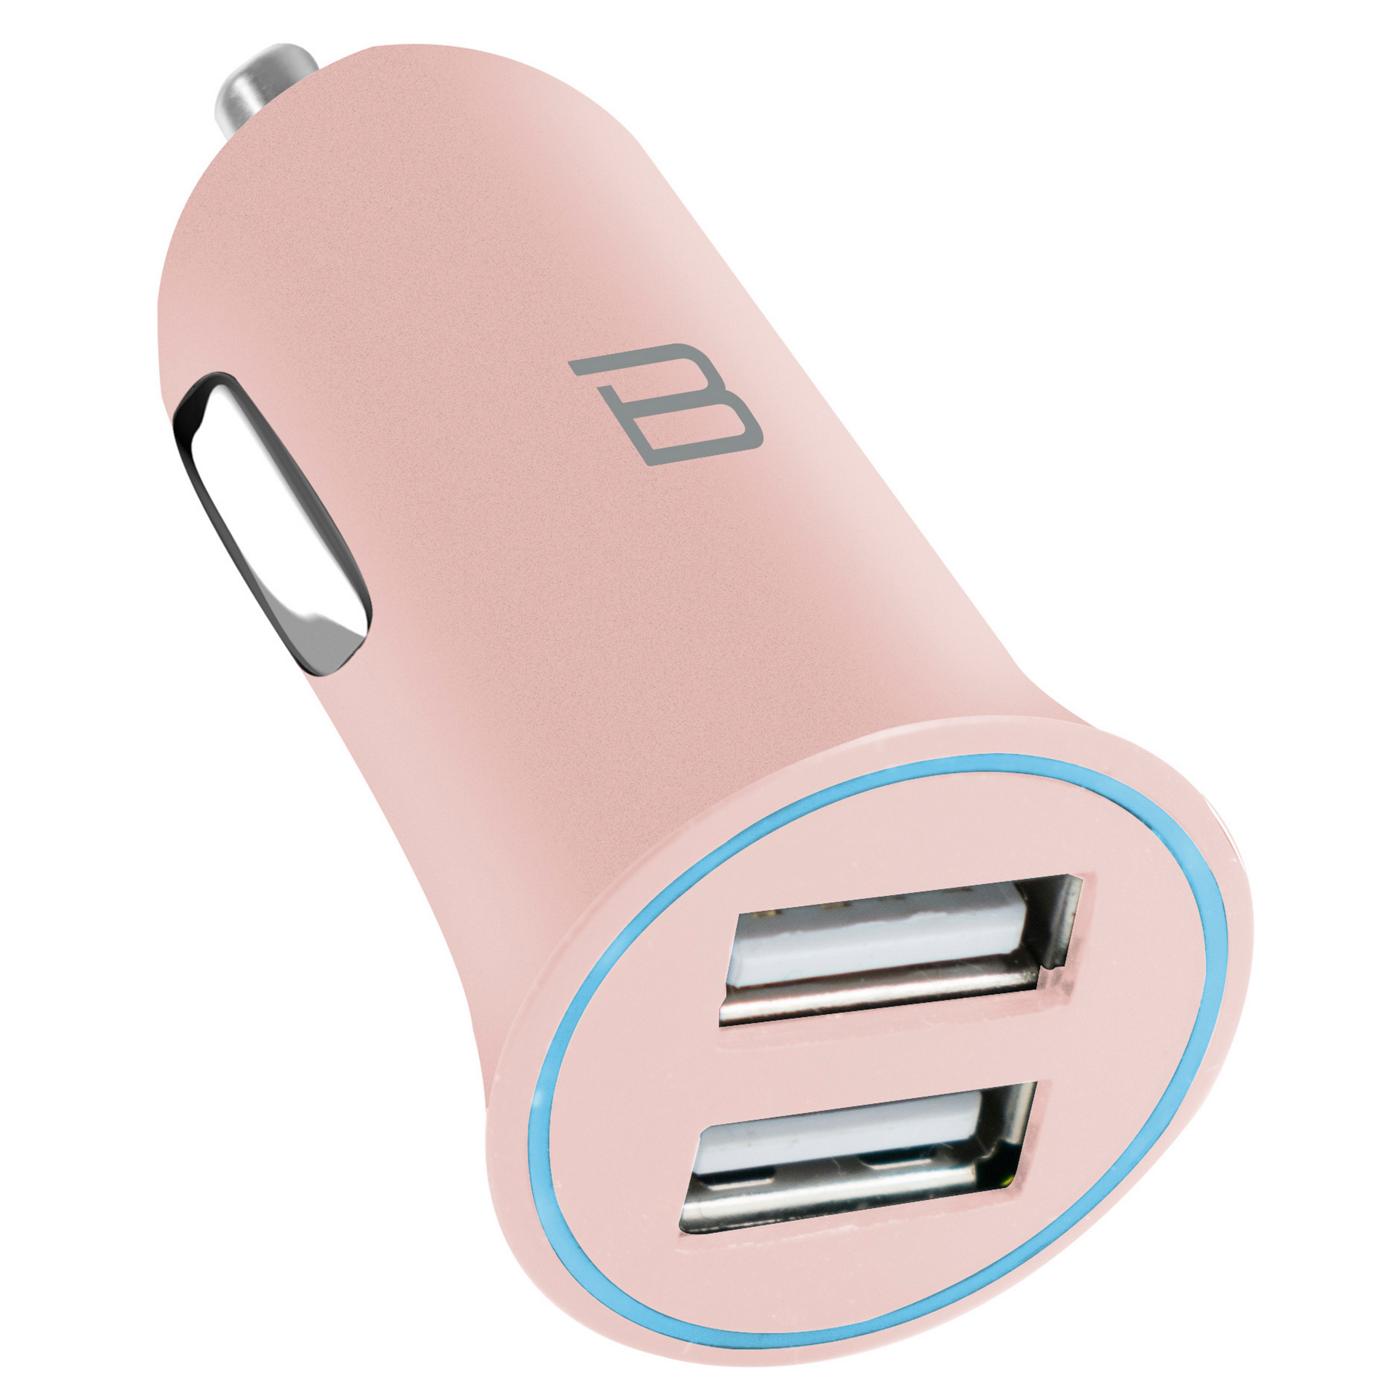 Bytech Dual USB Car Charger; image 2 of 2